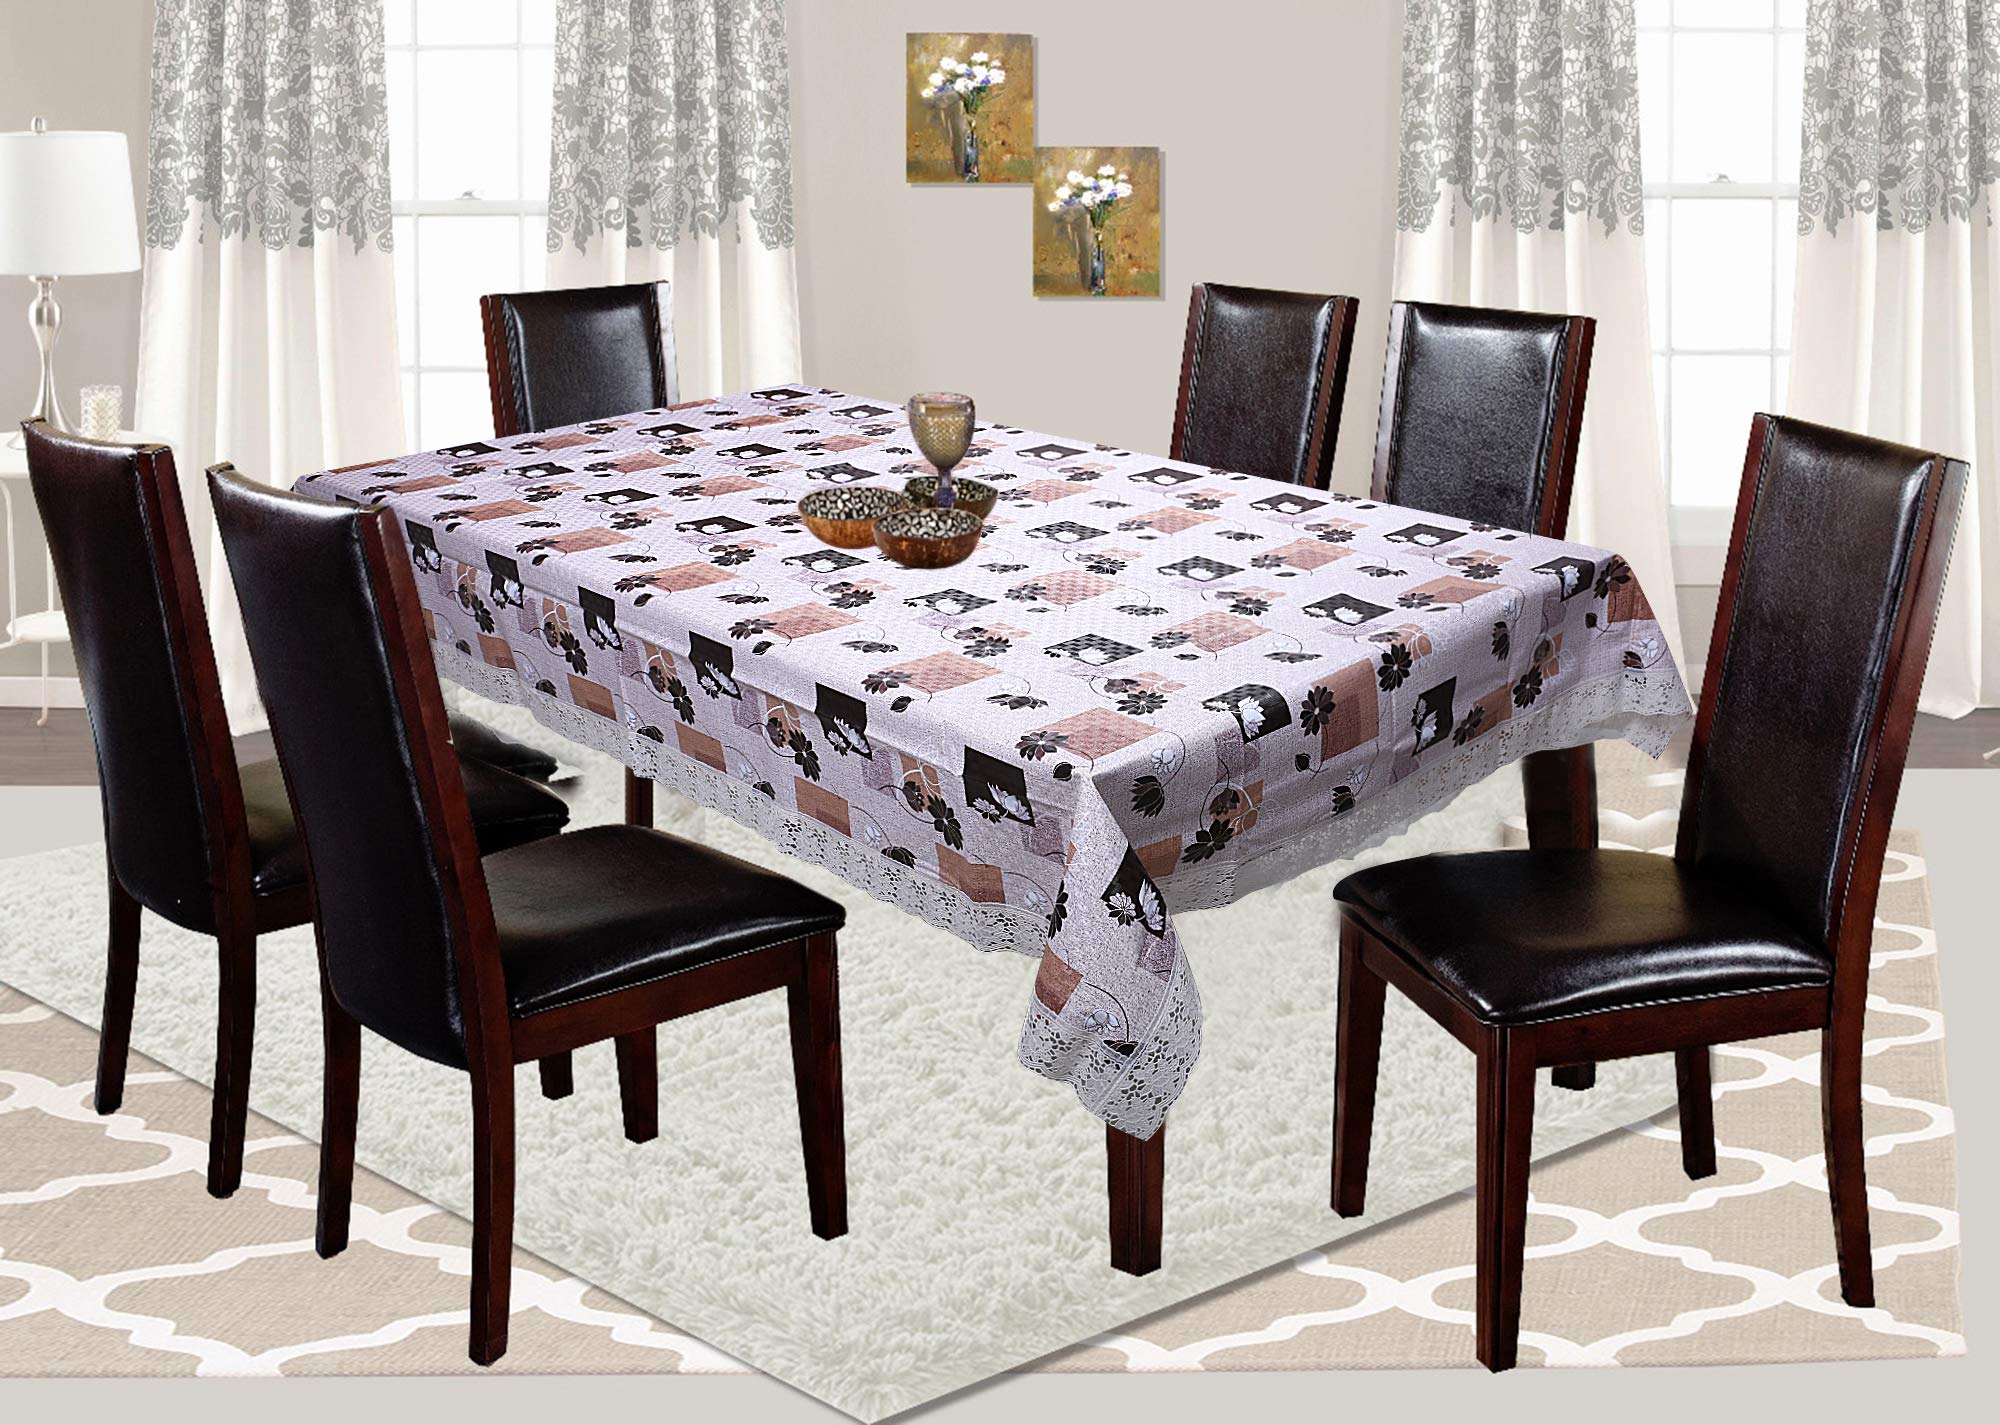 Kuber Industries PVC Flower Design 6 Seater Dining Table Cover (60 x90 inch, Brown) - CTKTC040125, Standard